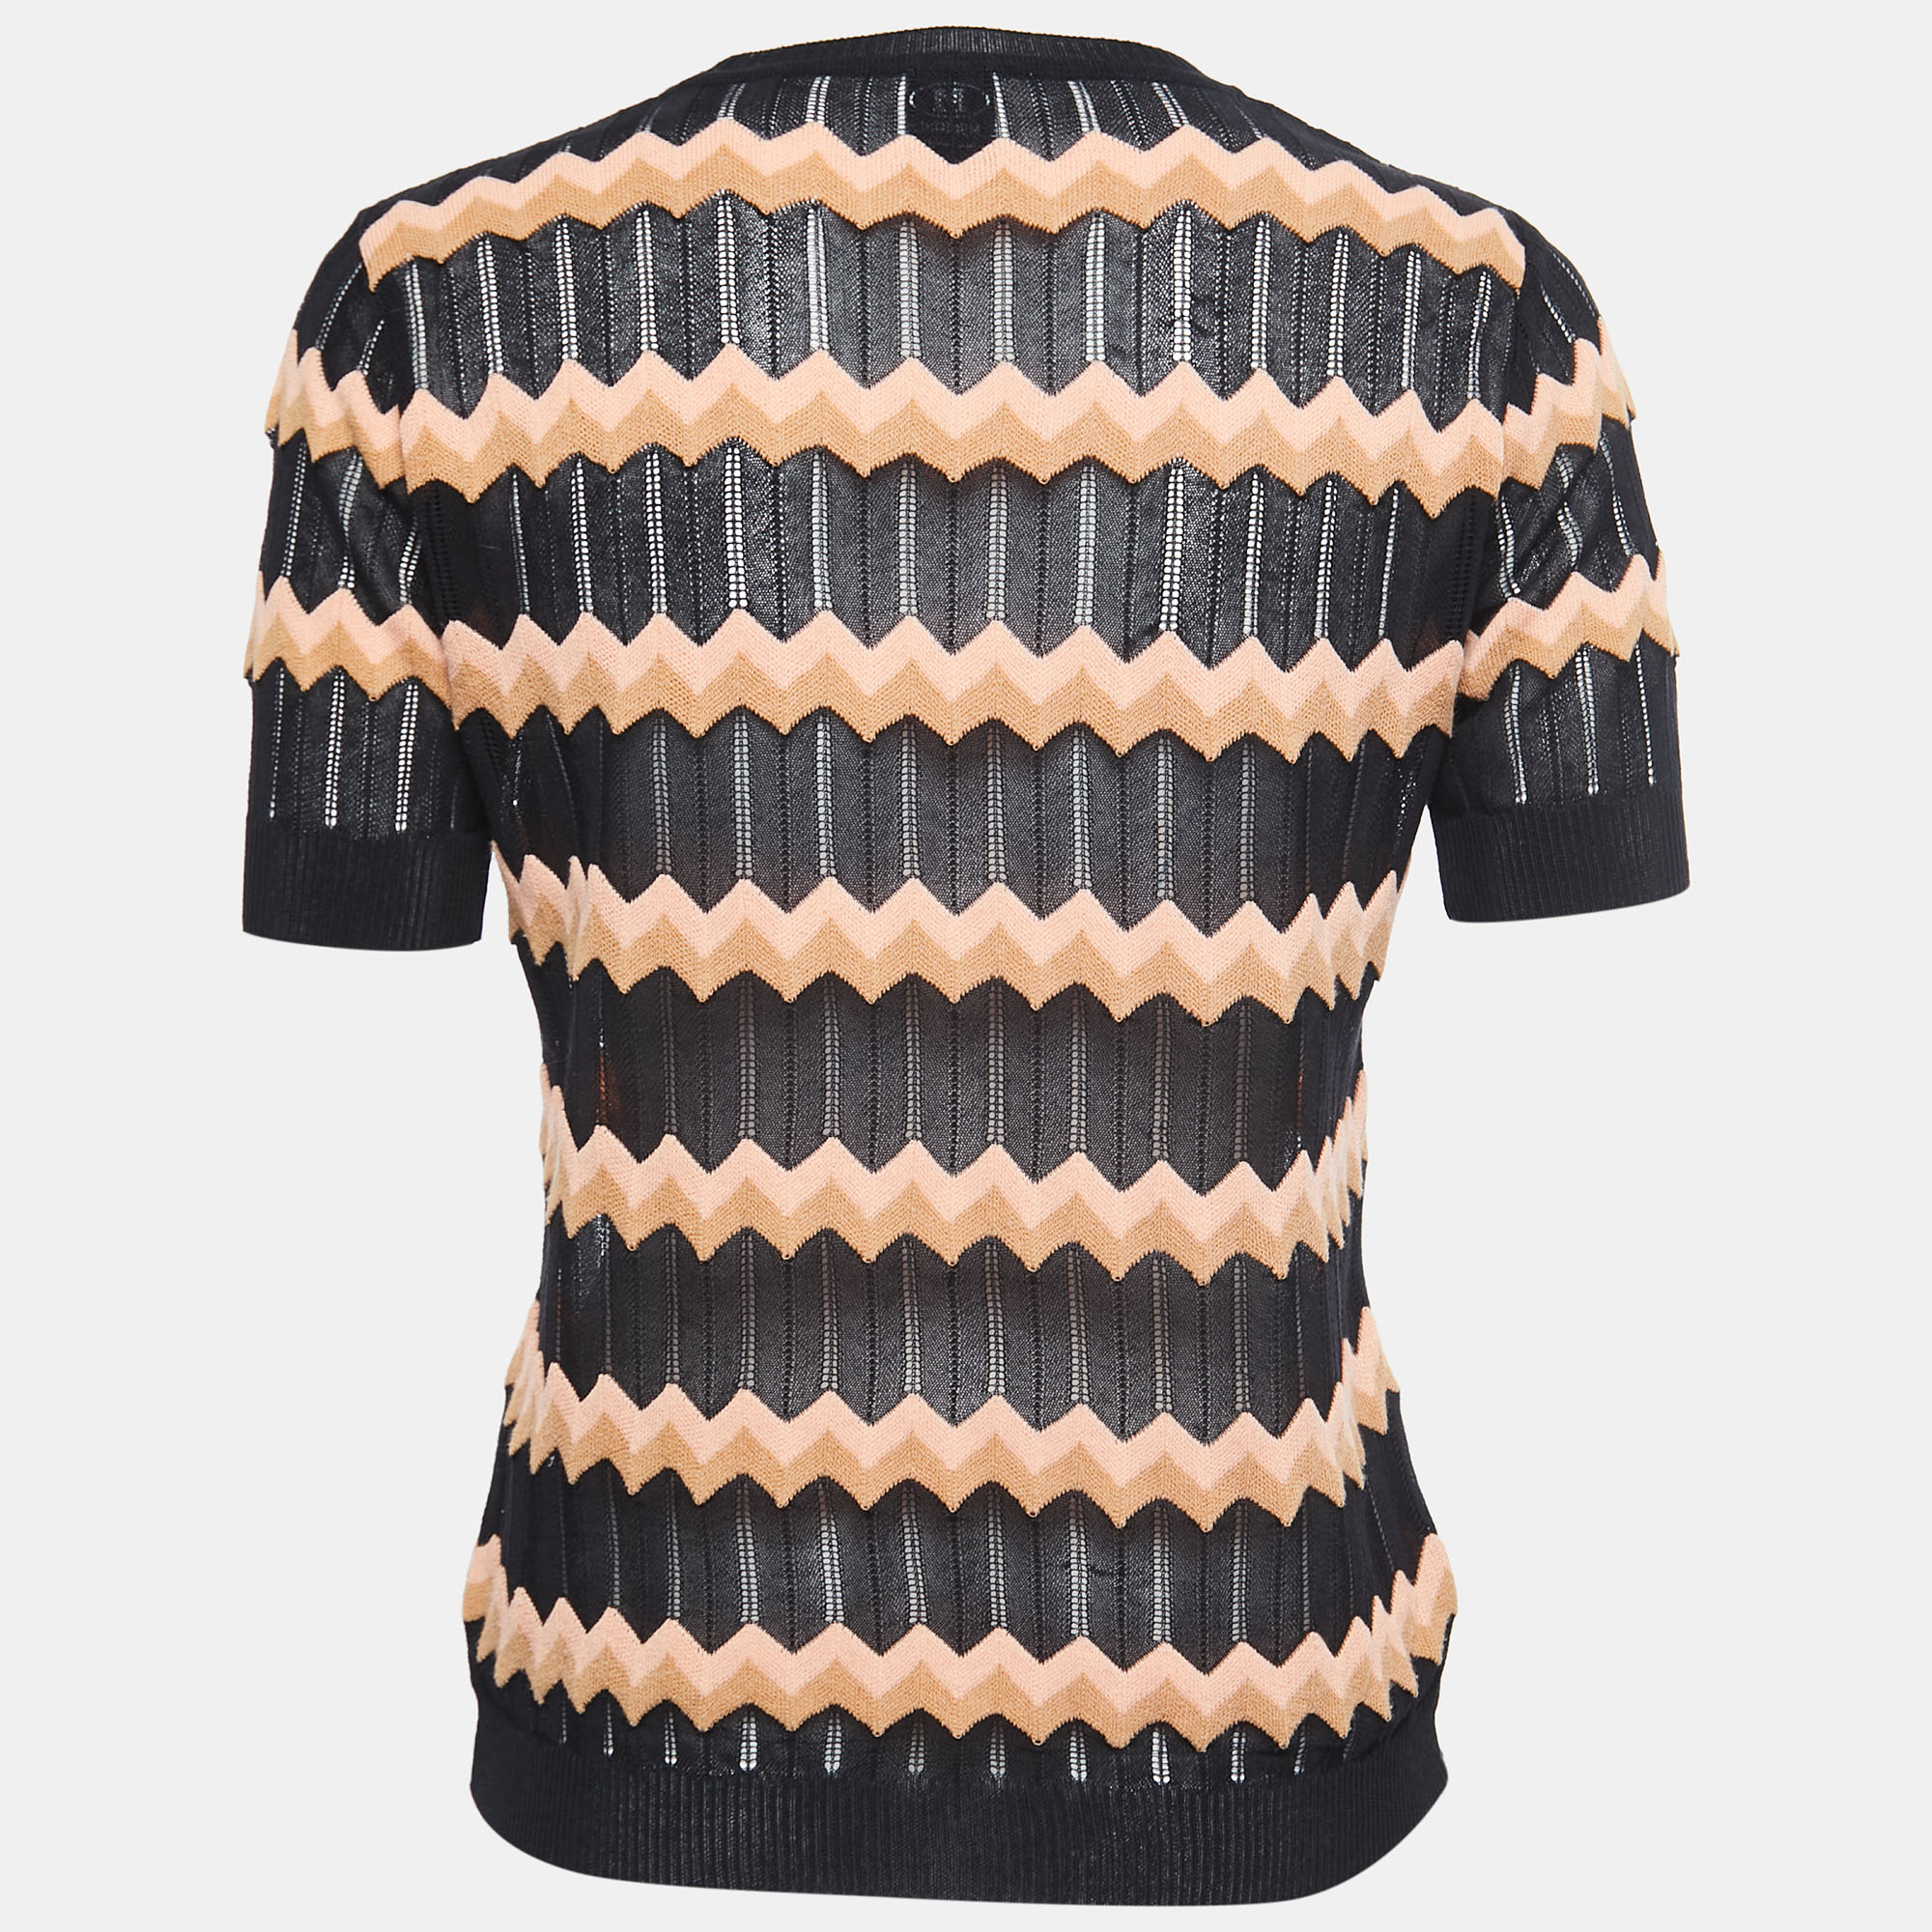 

Missoni Collection Black Chevron Patterned Knit Sweater Top